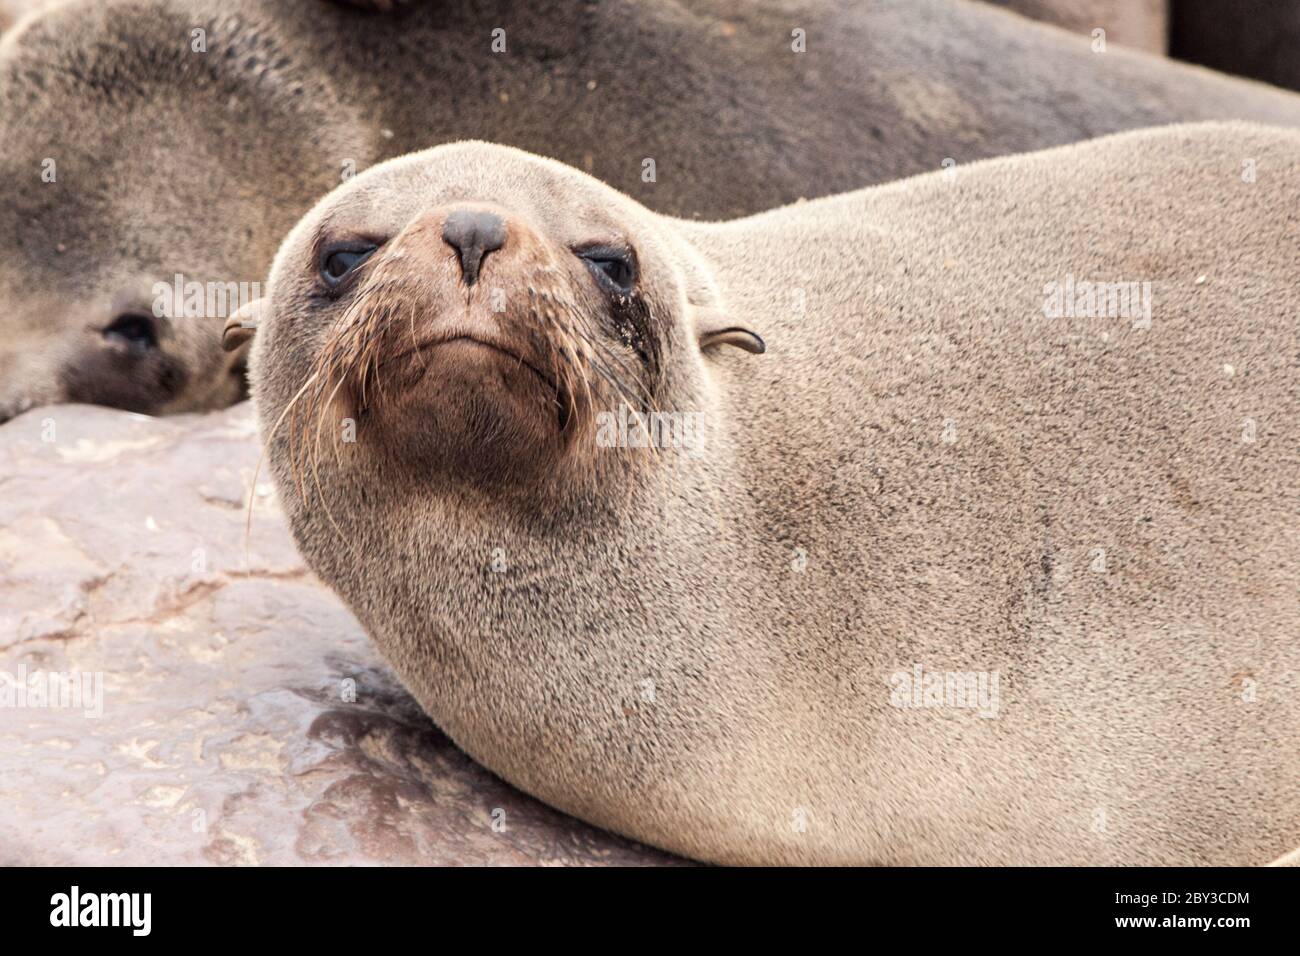 Close-up view of brown fur seal, Cape Cross Colony, Skeleton Coast, Namibia, Africa. Stock Photo